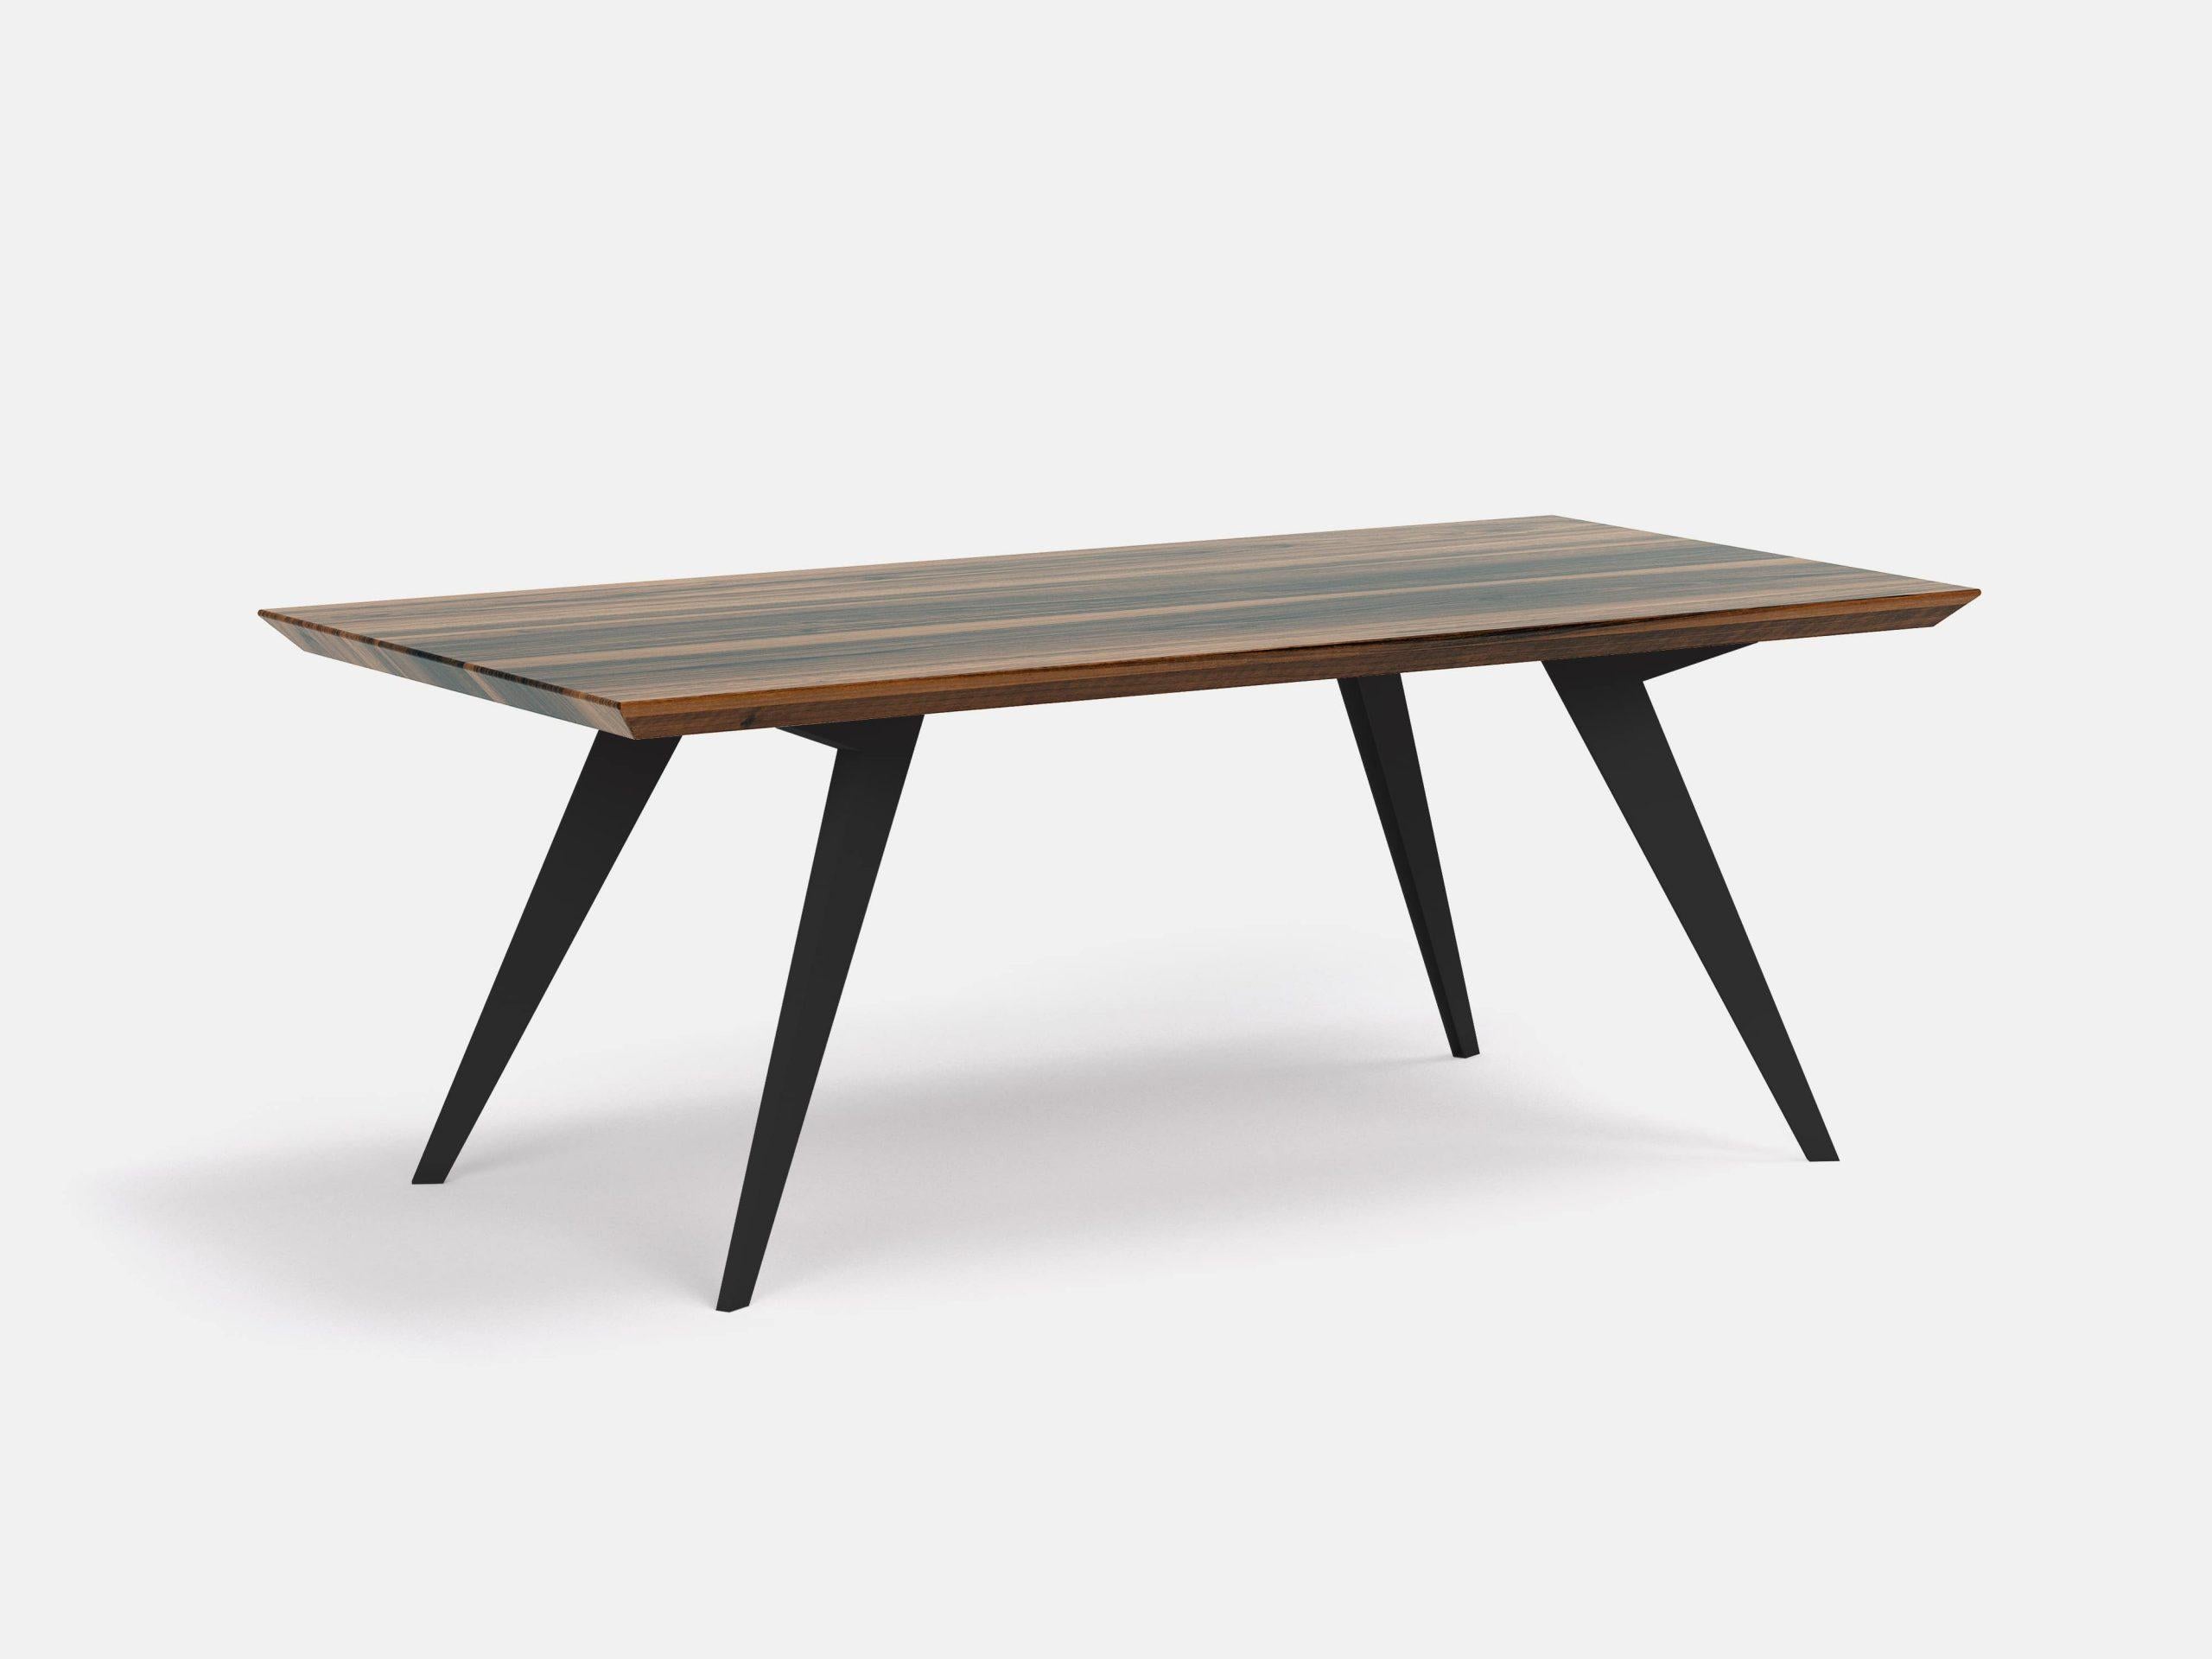 Walnut and steel minimalist 160 dining table
Dimensions: W 160 x D 100 x H 75 cm
Materials: American walnut 100% solid wood, steel legs

Dimensions available: 160, 200, 250, 300, 350, 400 cm
  

Roly-Poly table is the proof that through